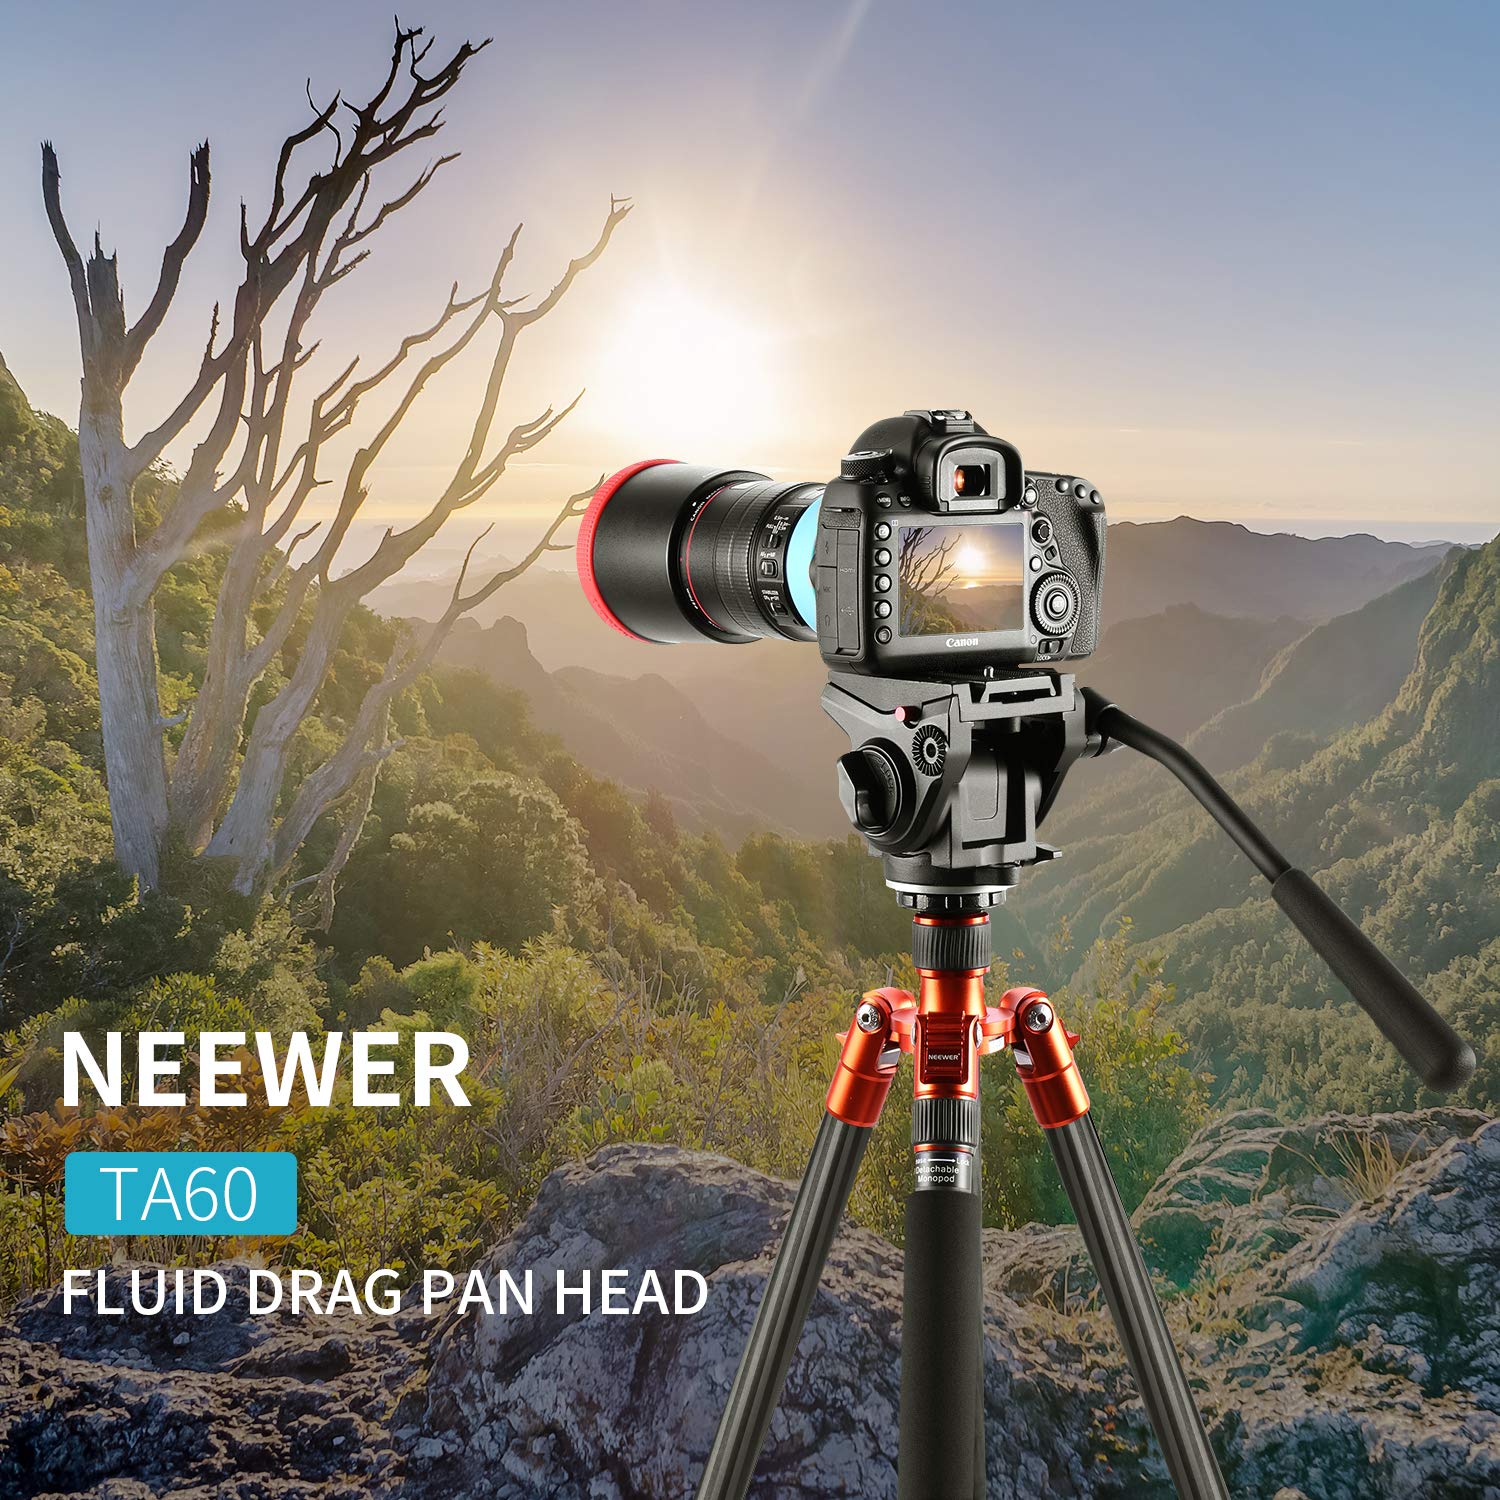 Neewer Heavy Duty Video Camera Tripod Fluid Drag Pan Head with 1/4 and 3/8 '' Screws Sliding Plate for DSLR Cameras Video Camcorders Shooting Filming,up to 11 pounds/5 Kilograms(Aluminum Alloy)